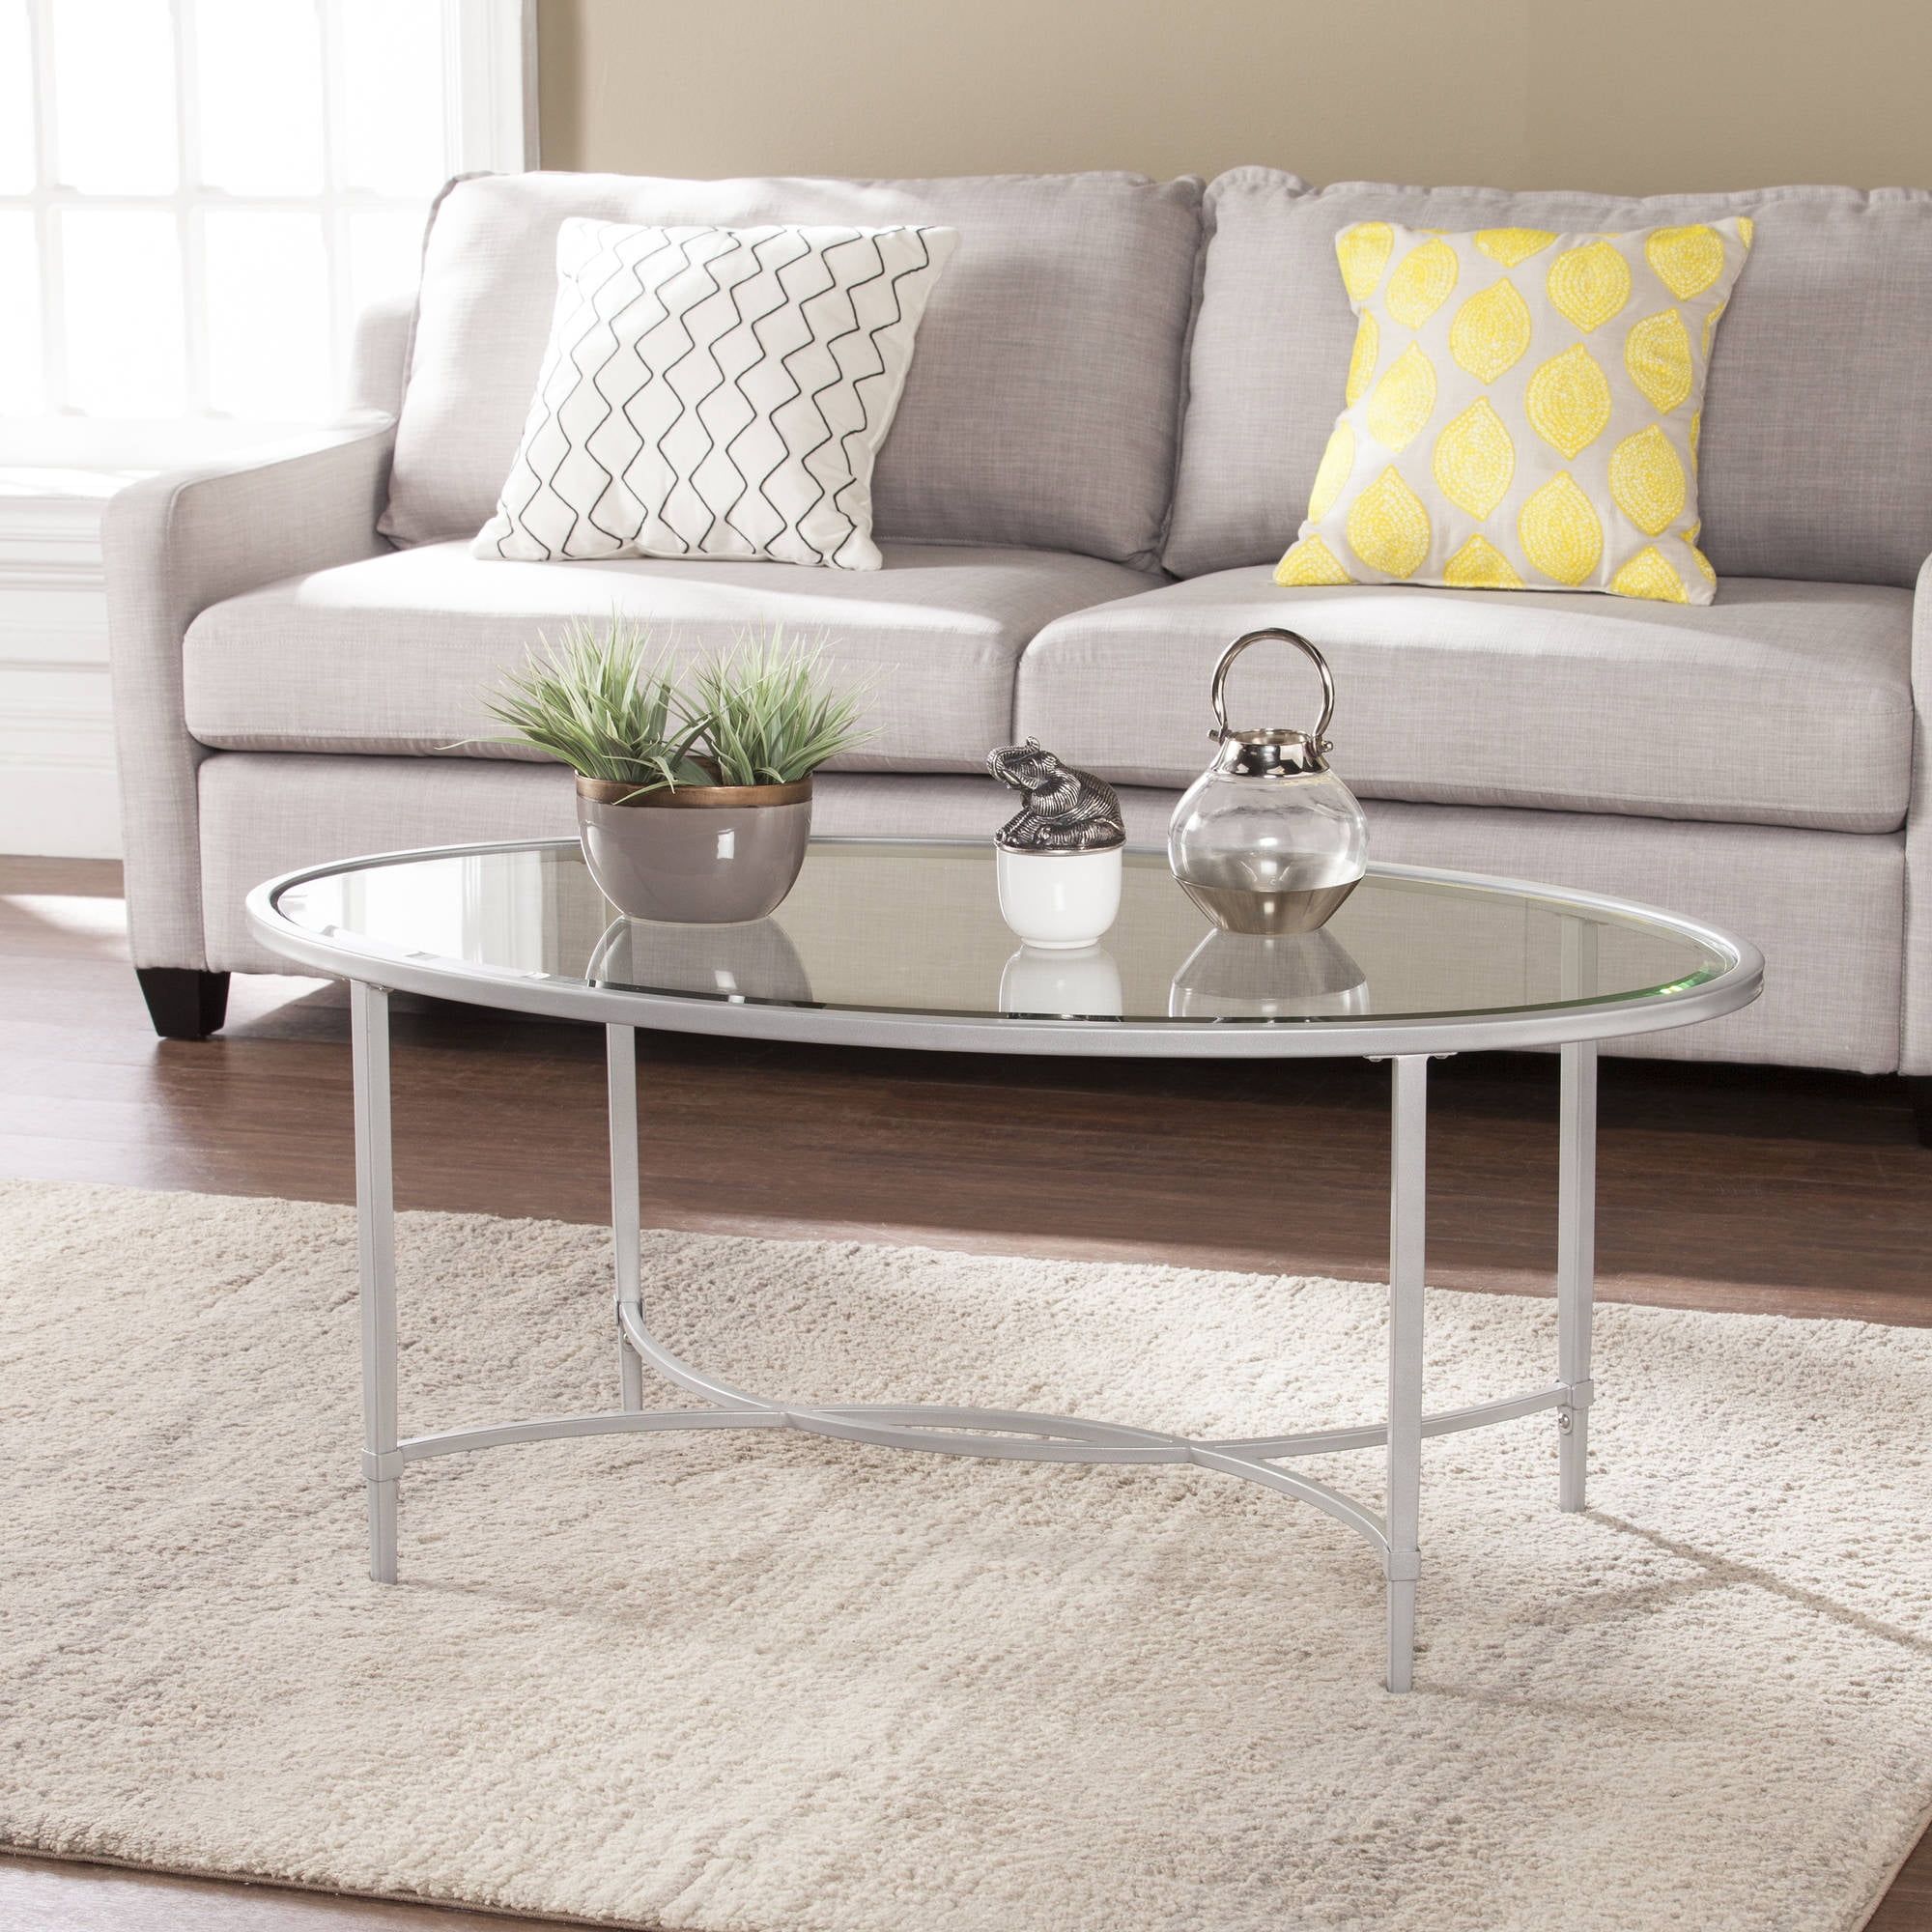 Quibilah Metal/glass Oval Coffee Table, Silver – Walmart Inside Oval Glass Coffee Tables (Gallery 6 of 20)